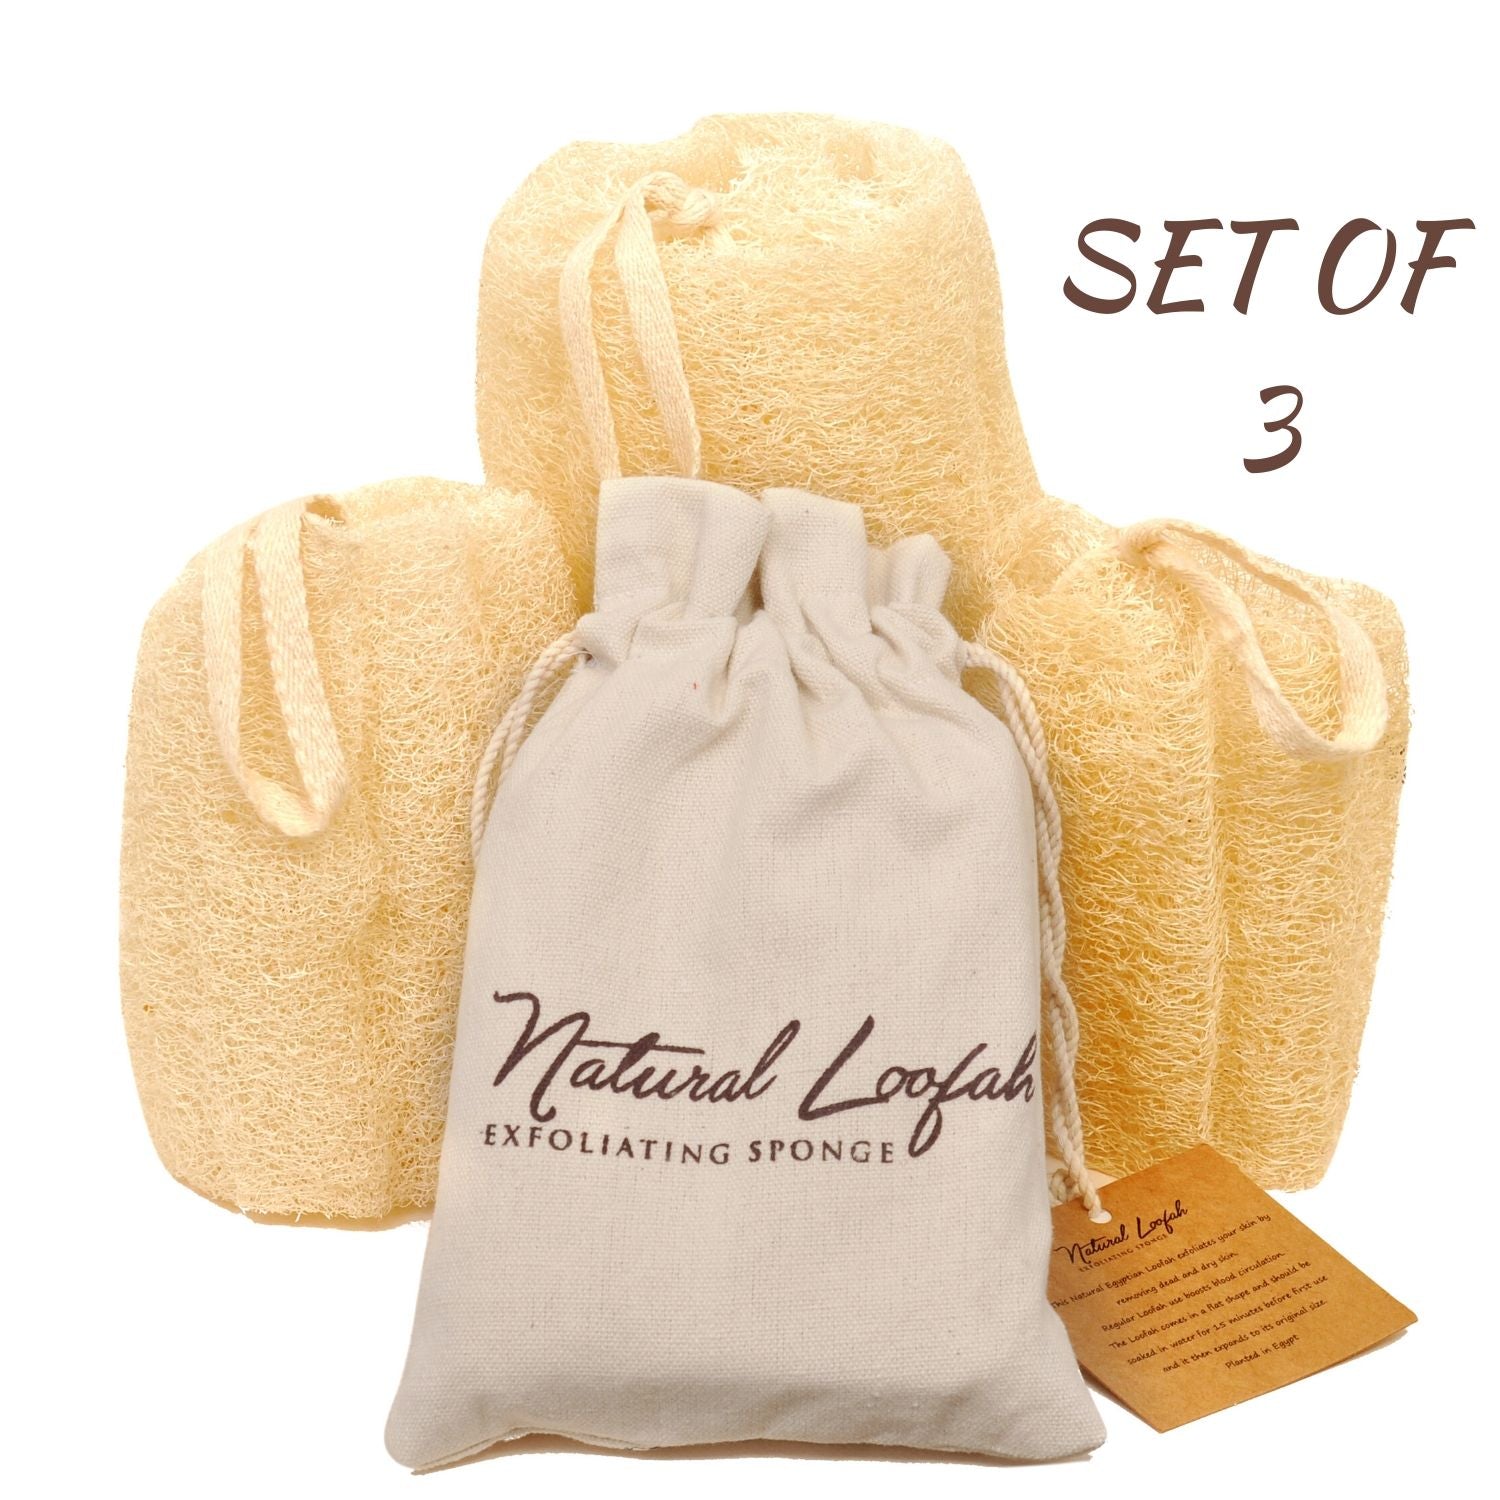 All Natural Loofah Sponge, Set of 3 Real Egyptian Bath & Shower Exfoliating Loofa Scrubber Sponges for Face, Back and Body, Eco Friendly, No Toxic Chemicals, 6" x 6"